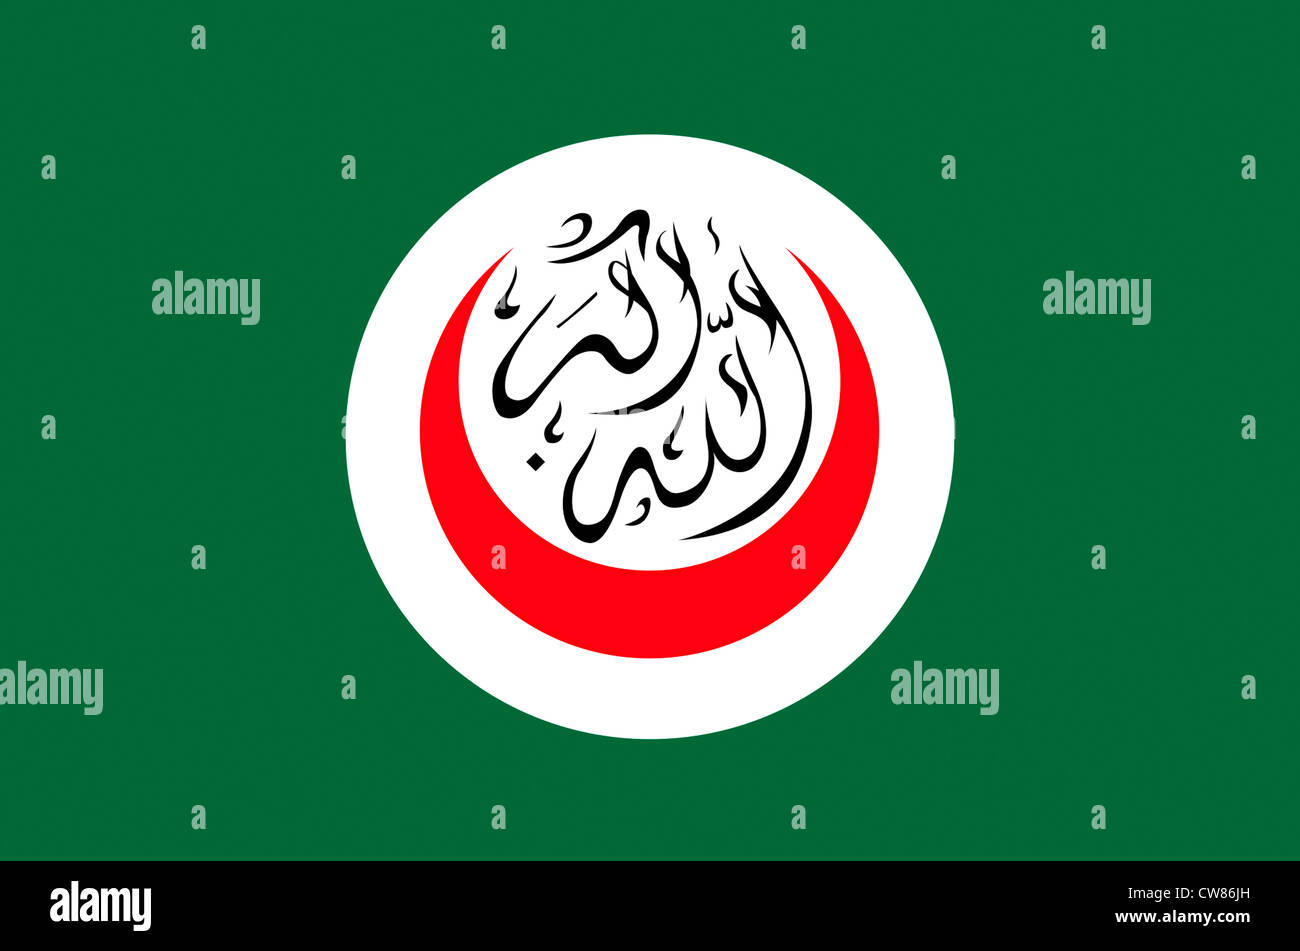 Flag with the coat of arms of the Organization of Islamic Cooperation OIC with seat in Jeddah. Stock Photo